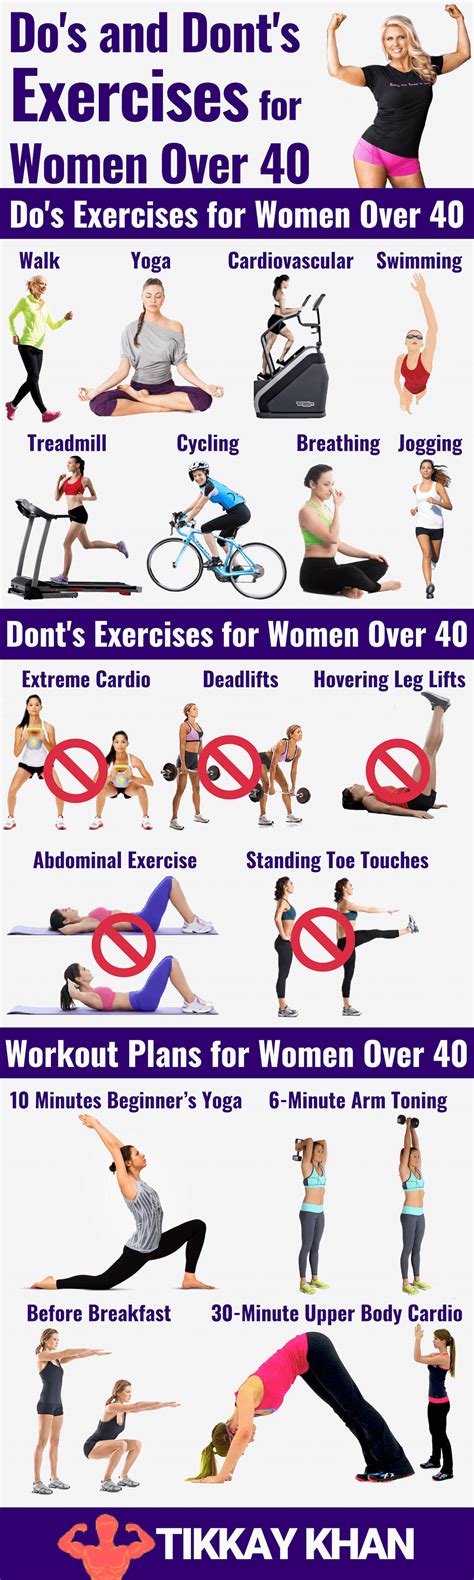 What is the best exercise for a 45 year old woman?